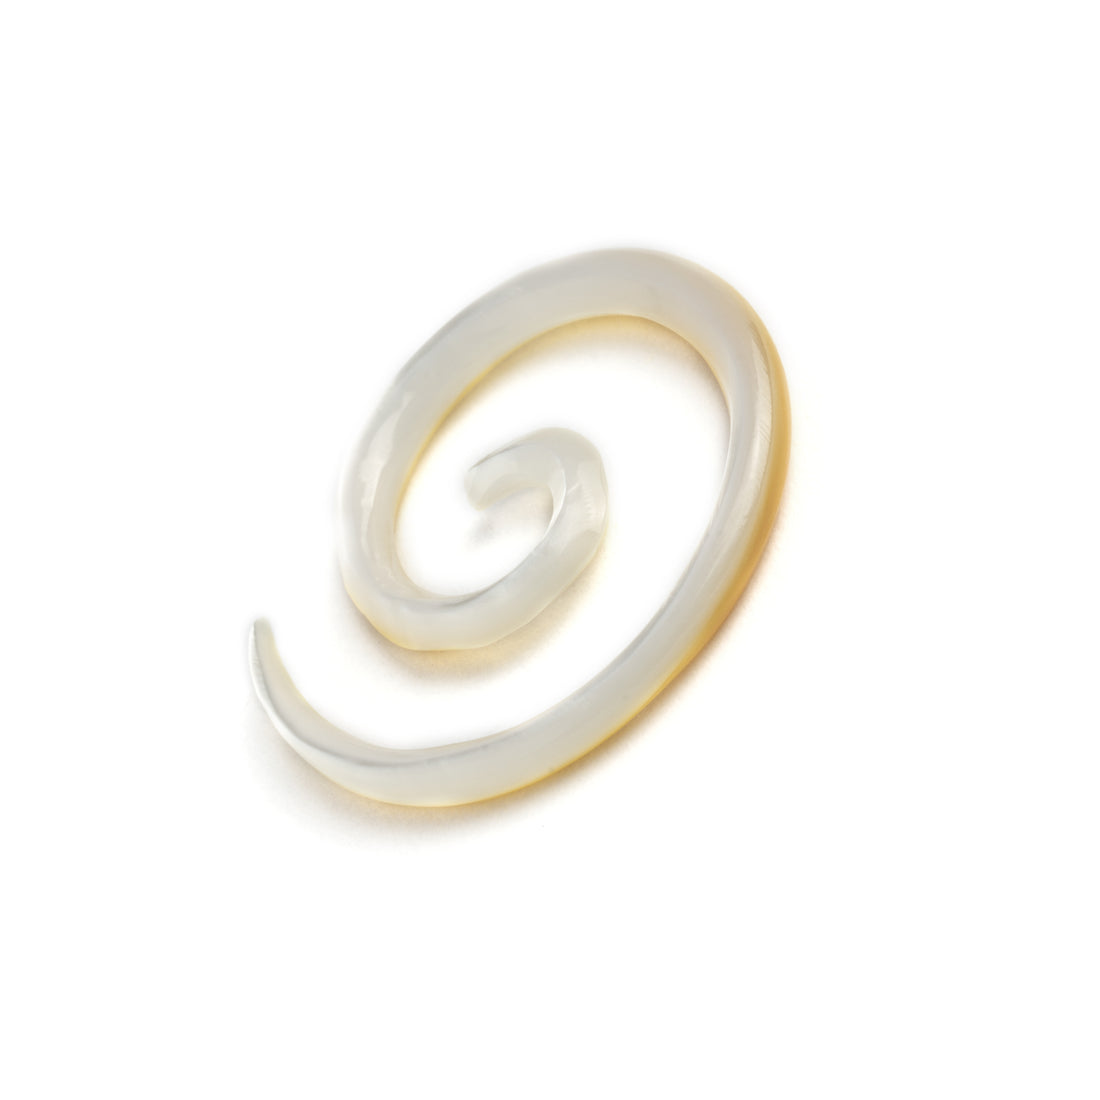 Mother Of Pearl Spiral gauge earring left side view